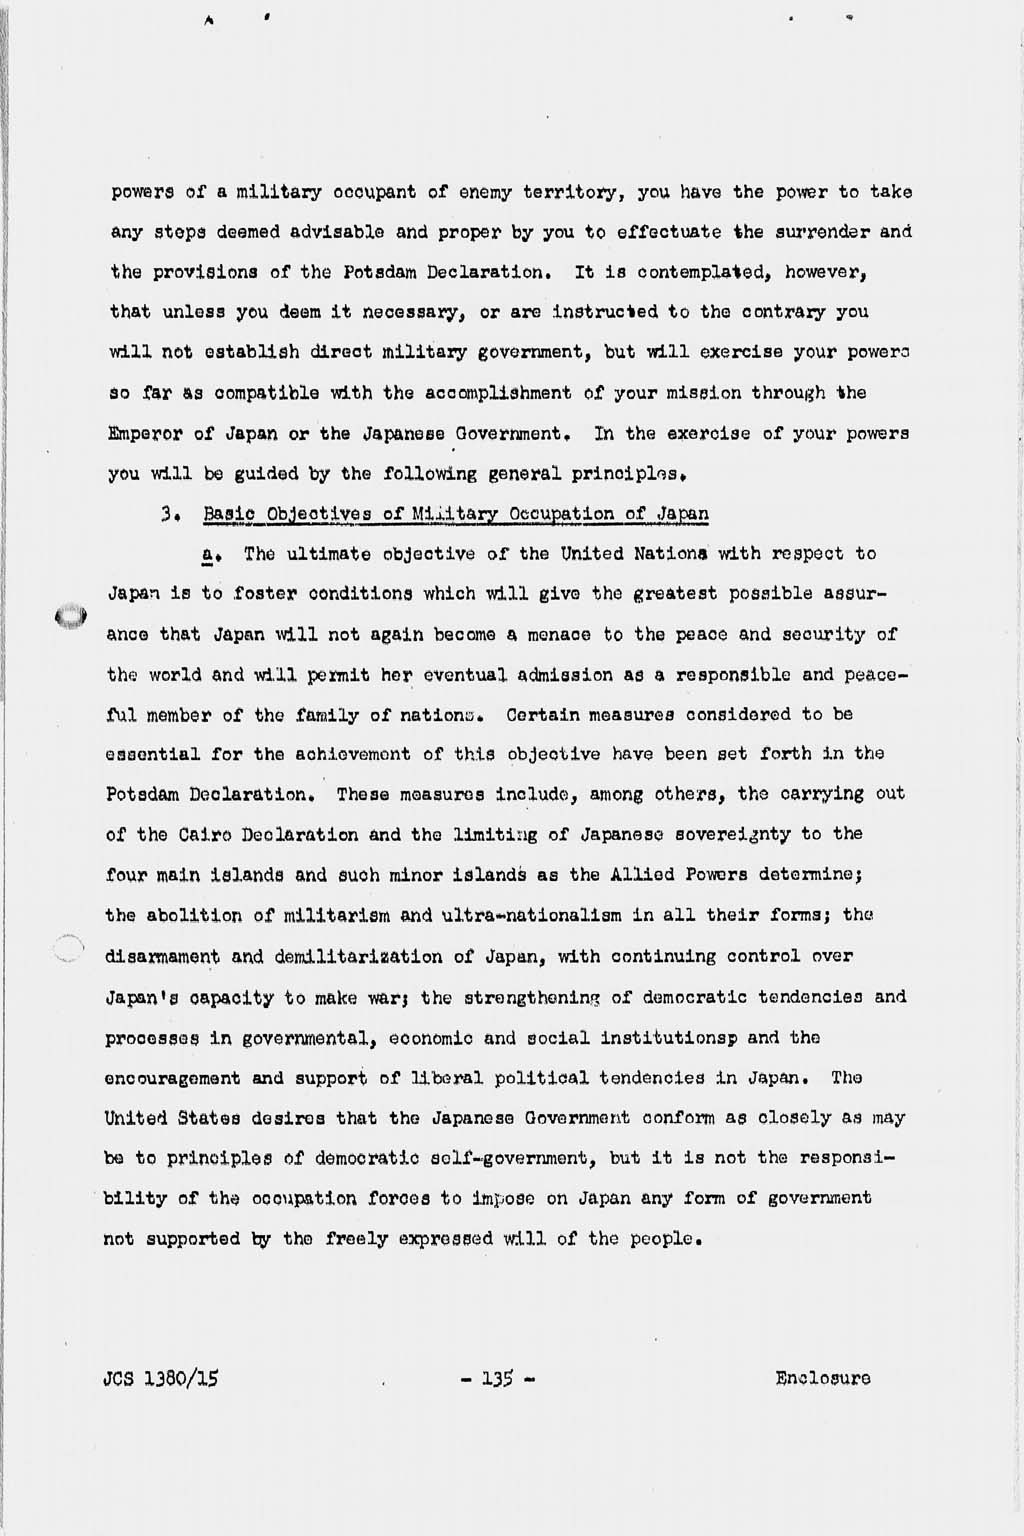 [Basic Initial Post Surrender Directive to Supreme Commander for the Allied Powers for the Occupation and Control of Japan (JCS1380/15)](Larger image)